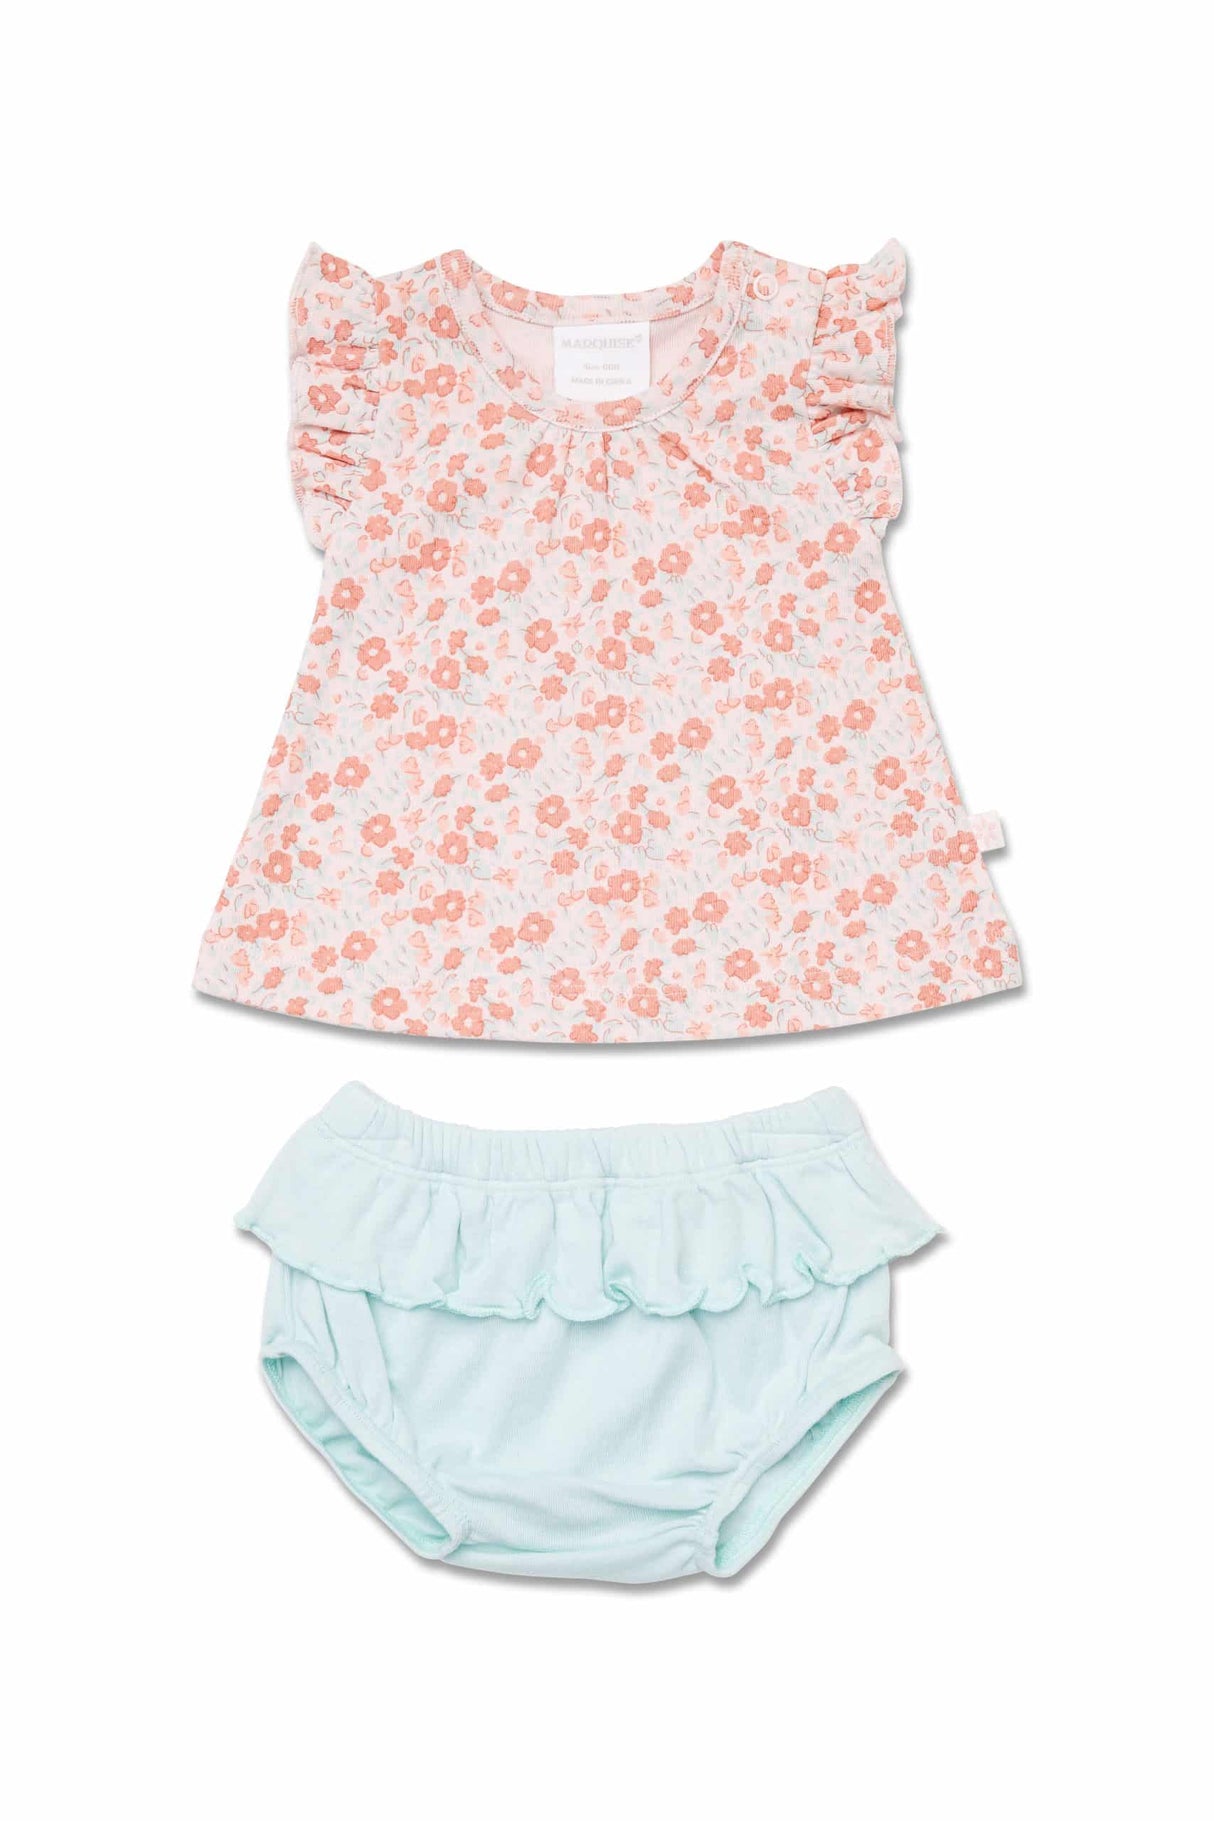 Marquise Floral Frill Top and Nappy Pant Set